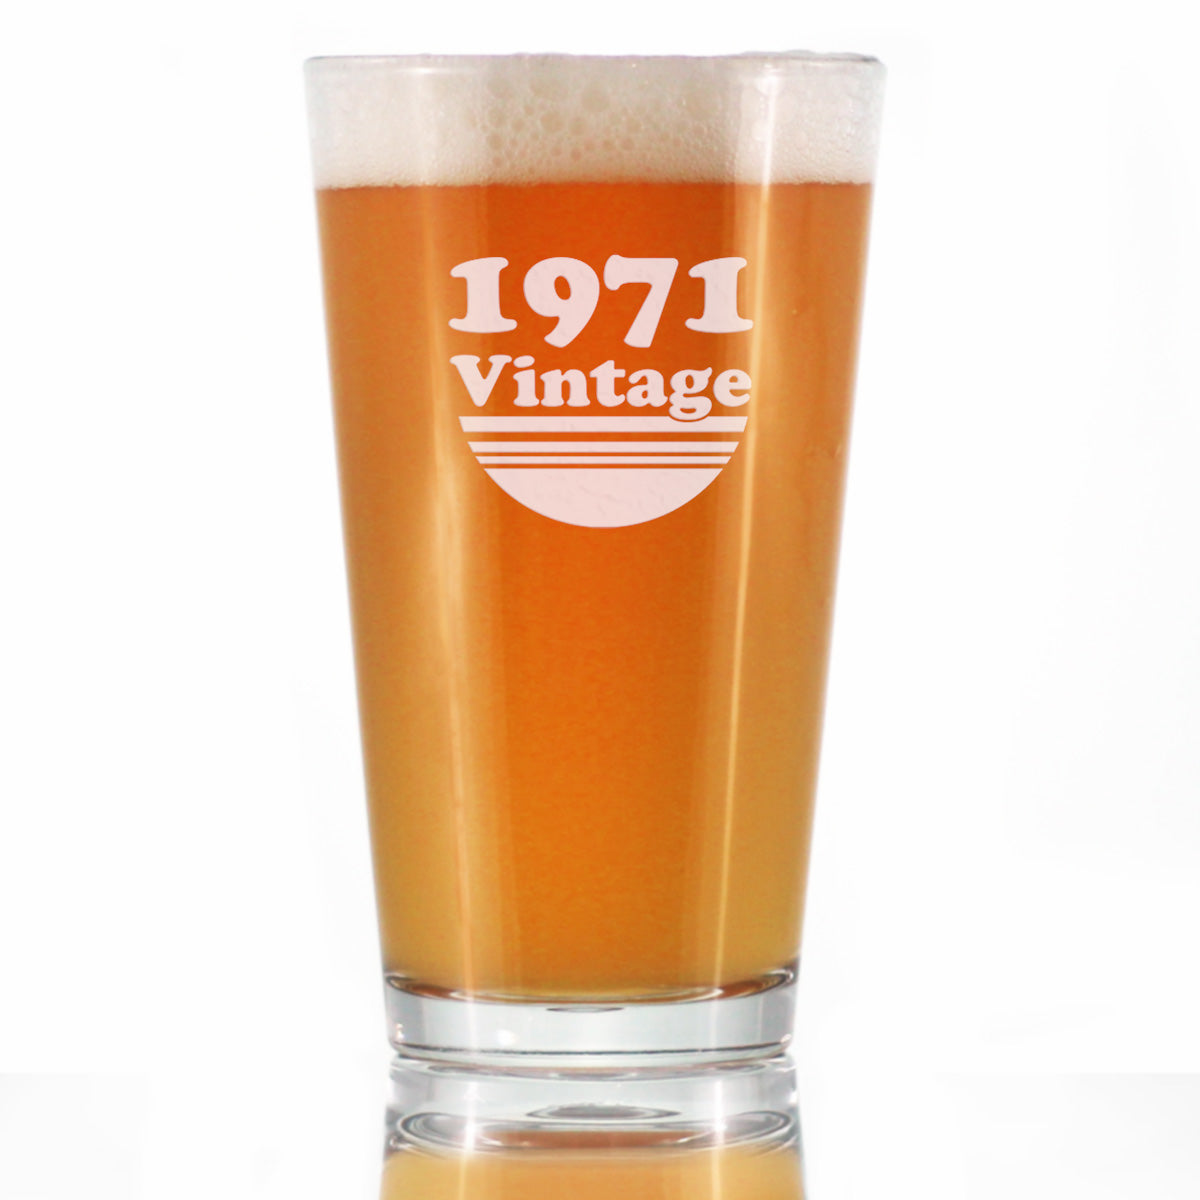 Vintage 1971 - Pint Glass for Beer - 52nd Birthday Gifts for Men or Women Turning 52 - Fun Bday Party Decor - 16 oz